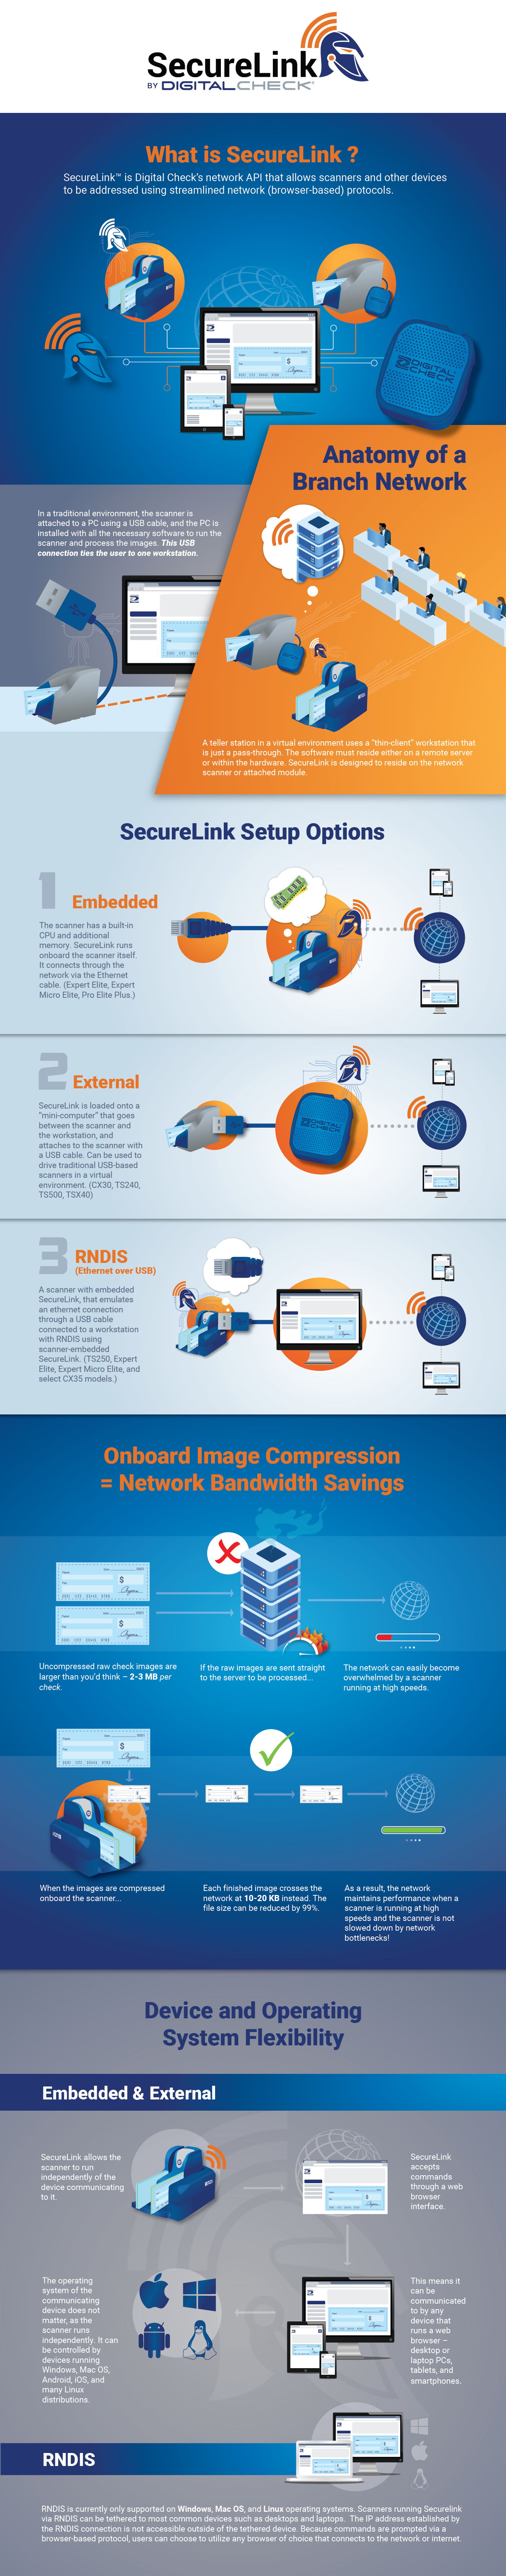 network scanning infographic.